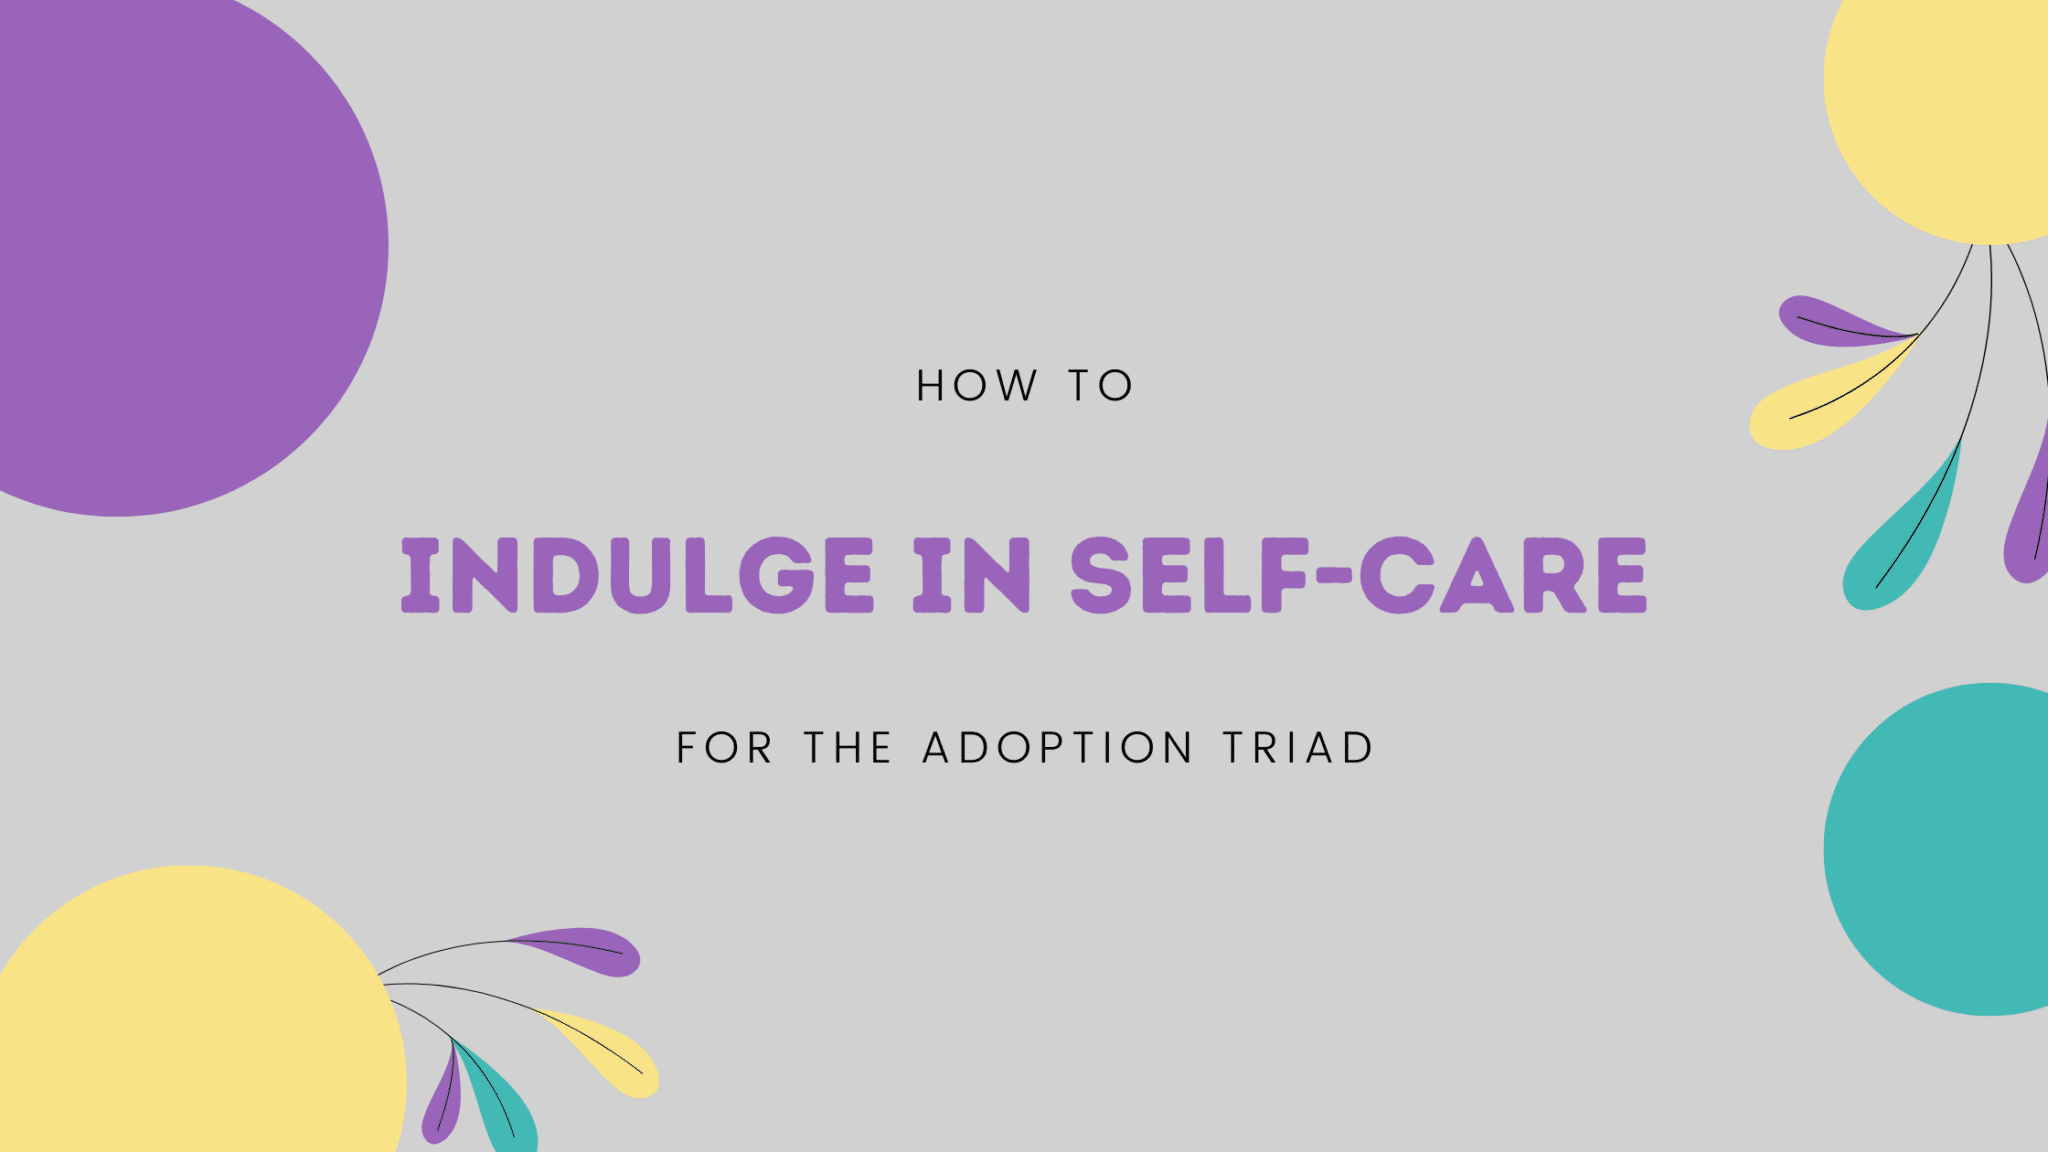 How to Indulge in Self-Care for the Adoption Triad